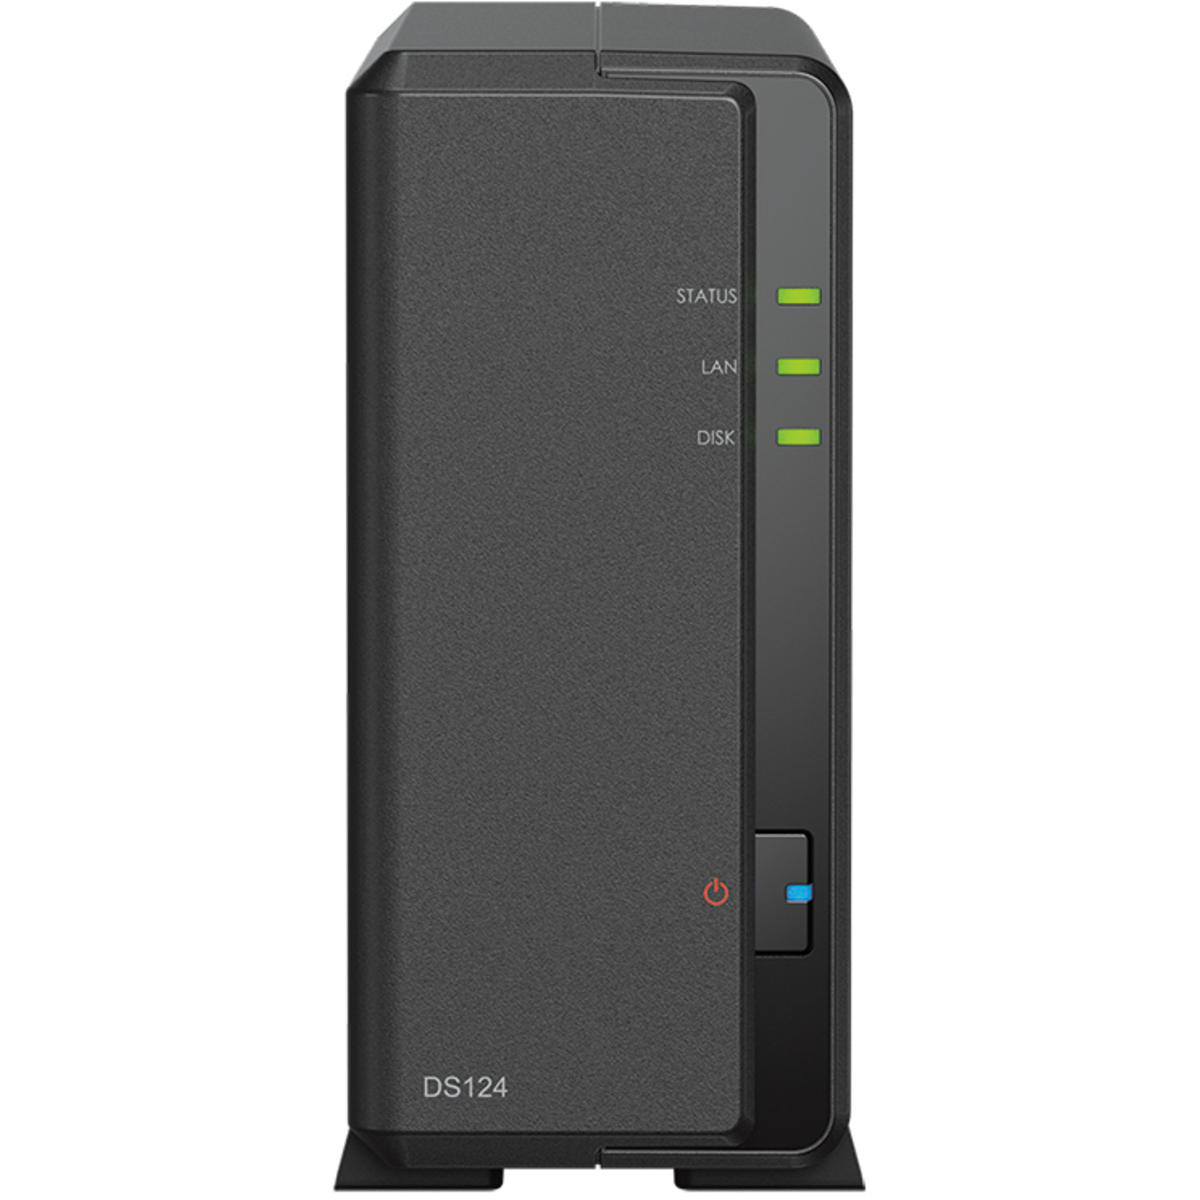 buy $310 Synology DiskStation DS124 4tb Desktop NAS - Network Attached Storage Device 1x4000gb Toshiba MN Series MN08ADA400E 3.5 7200rpm SATA 6Gb/s HDD NAS Class Drives Installed - Burn-In Tested - ON SALE - nas headquarters buy network attached storage server device das new raid-5 free shipping simply usa DiskStation DS124